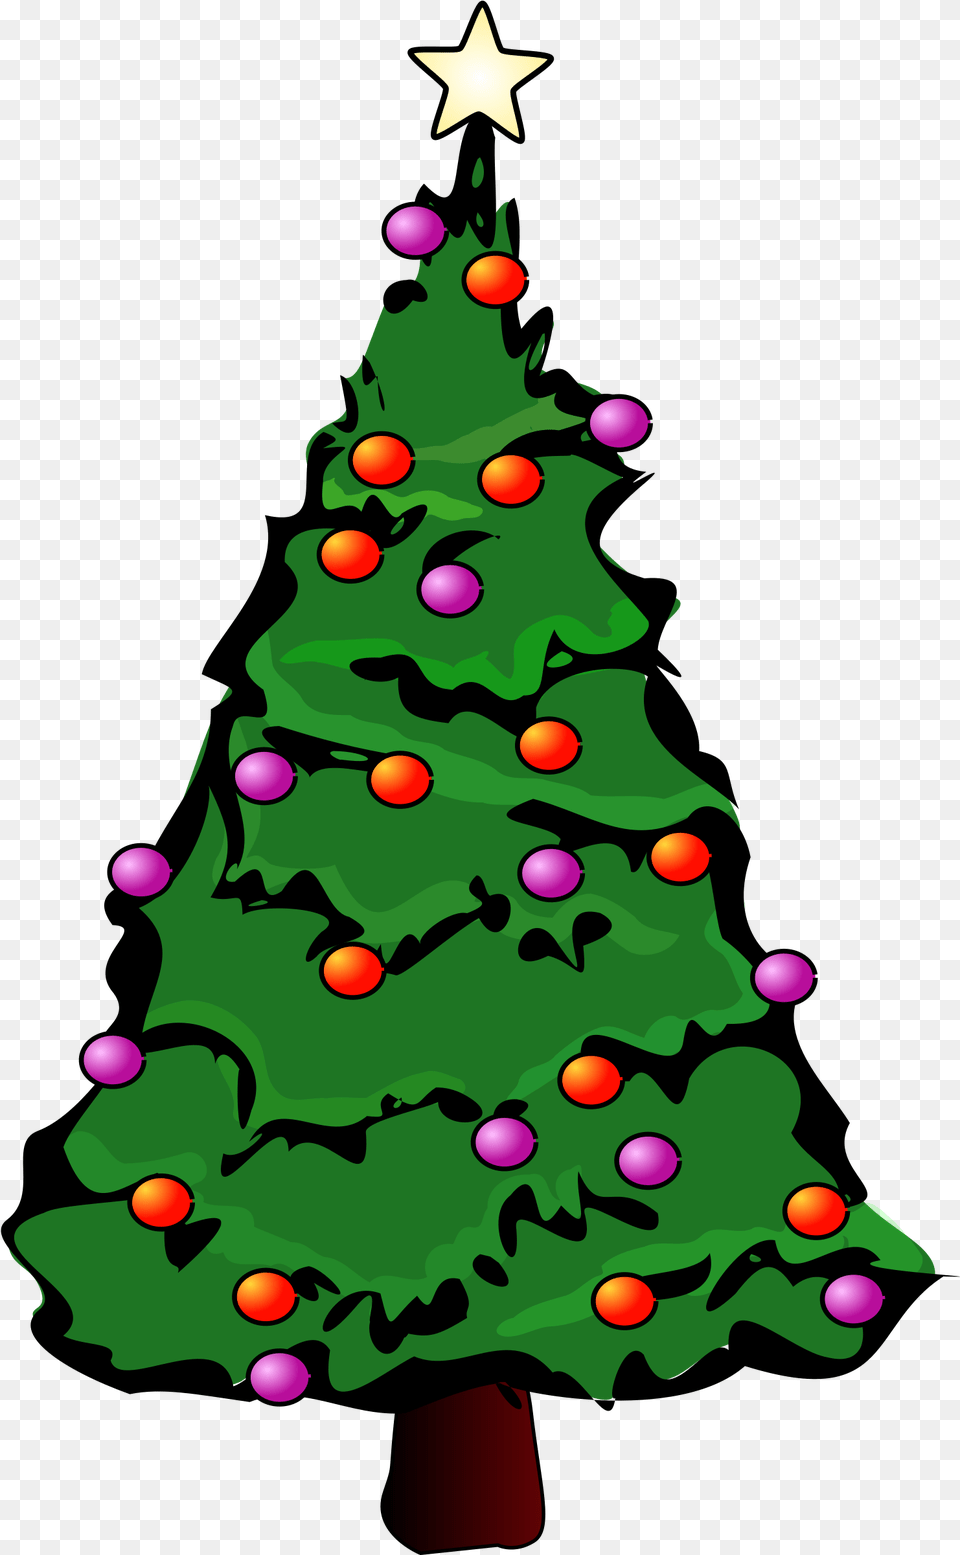 Transparent Christmas Tree Vector Christmas Tree Clipart Hd, Plant, Person, Baby, Christmas Decorations Png